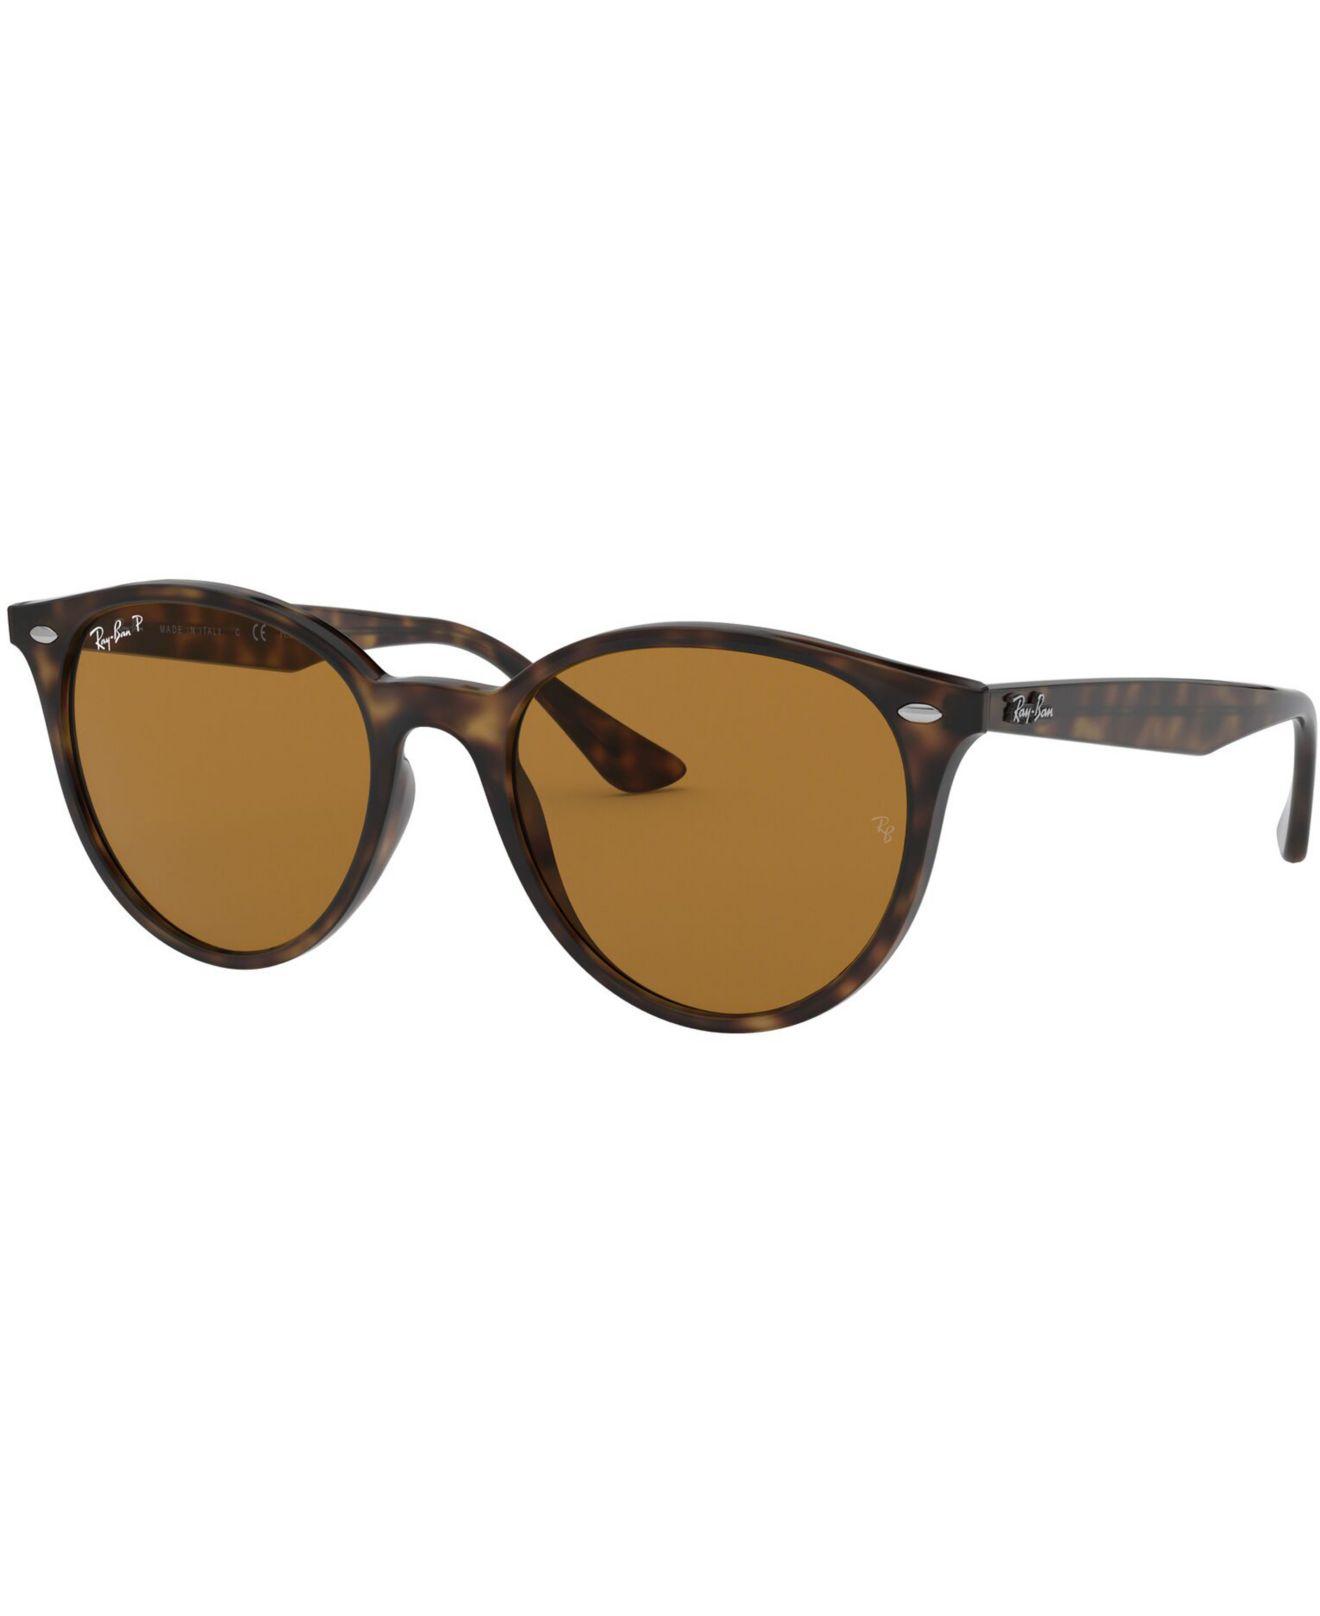 Ray Ban Polarized Sunglasses Rb4305 53 In Brown Lyst